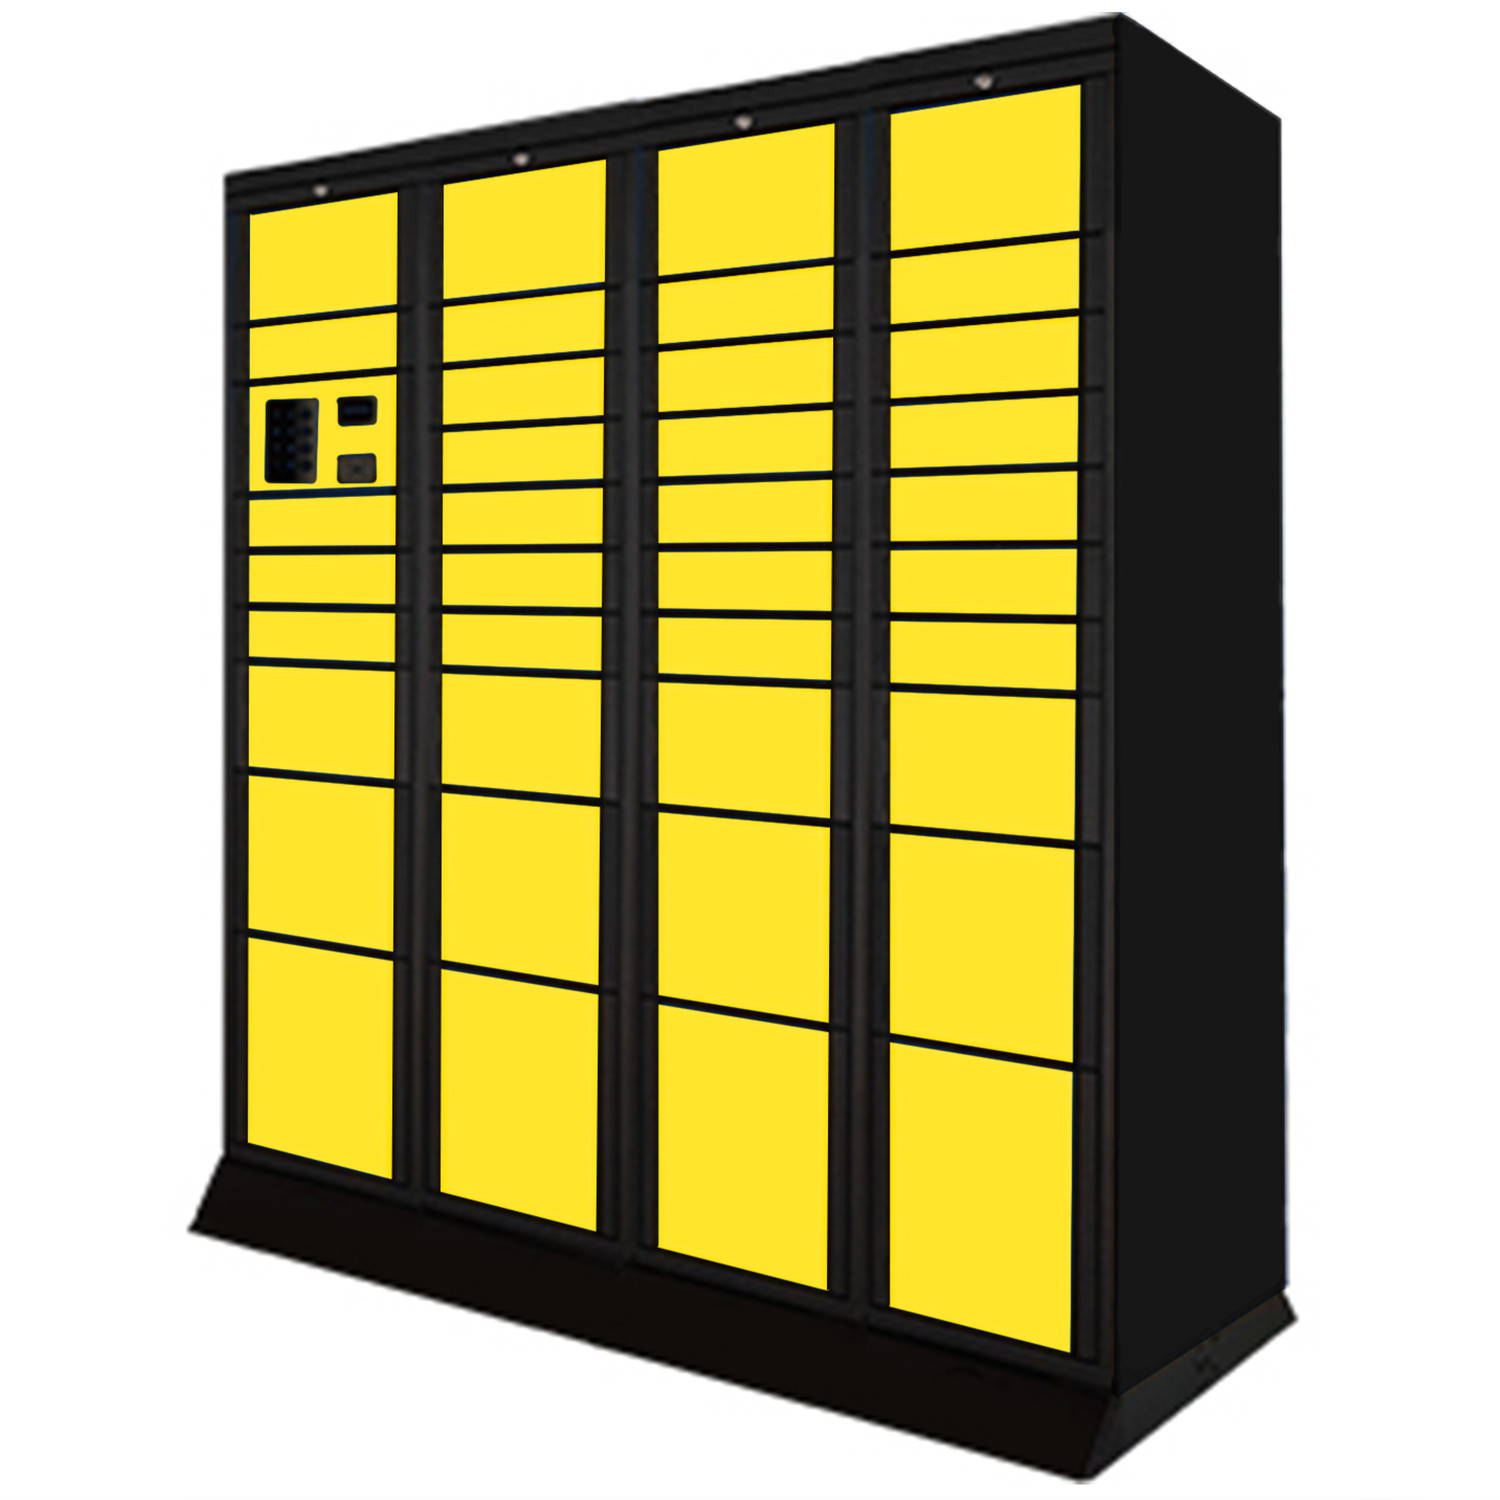 SmartSync ppe vening lockers designed for temporary loan items.